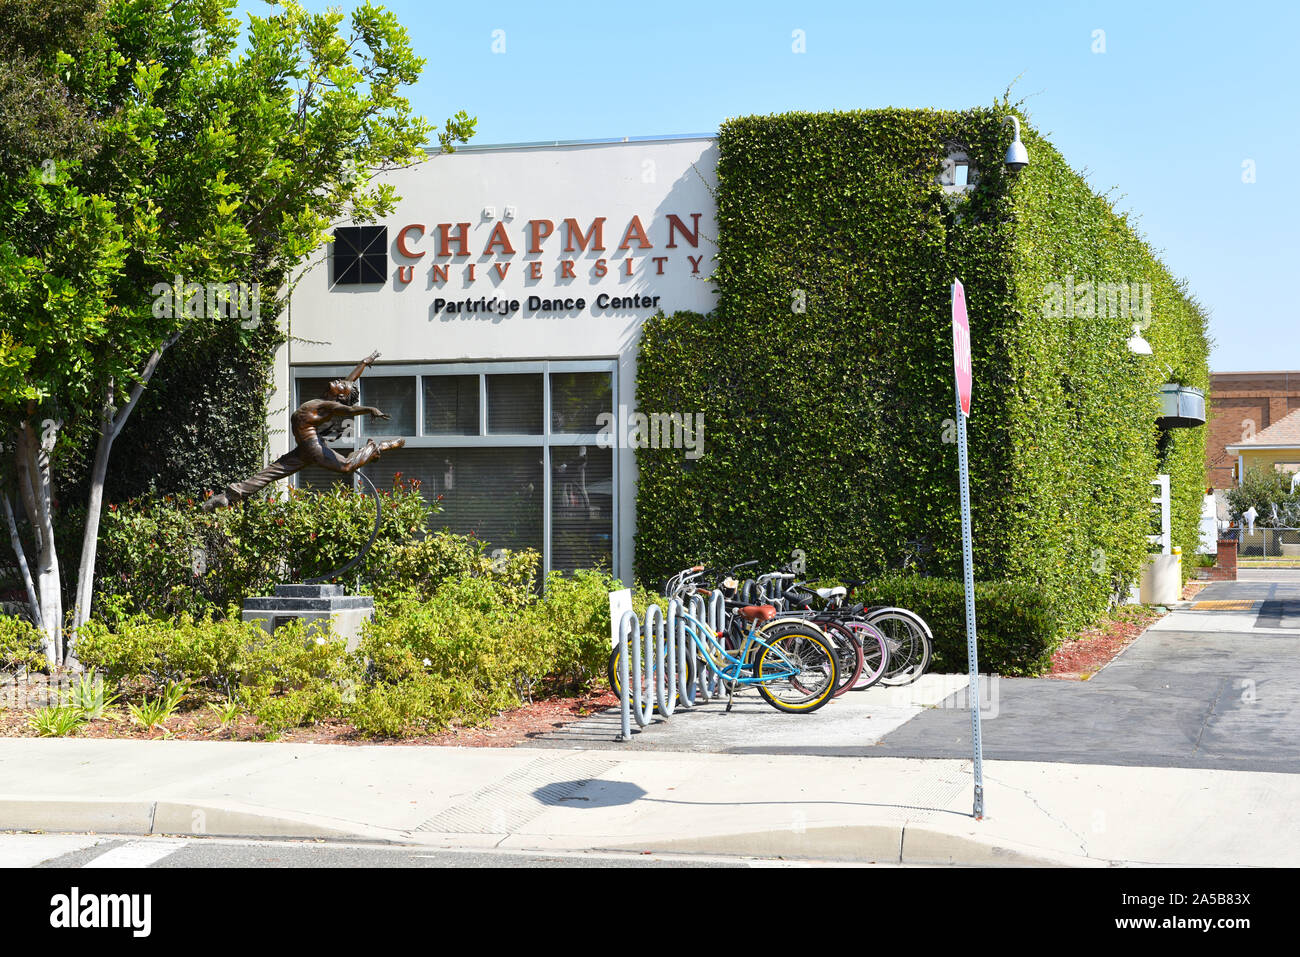 ORANGE, CALIFORNIA - 14 OCT 2019: Chapman University’s Partridge Dance Center. Located at the corner of Cypress and Maple, this state of the art dance Stock Photo